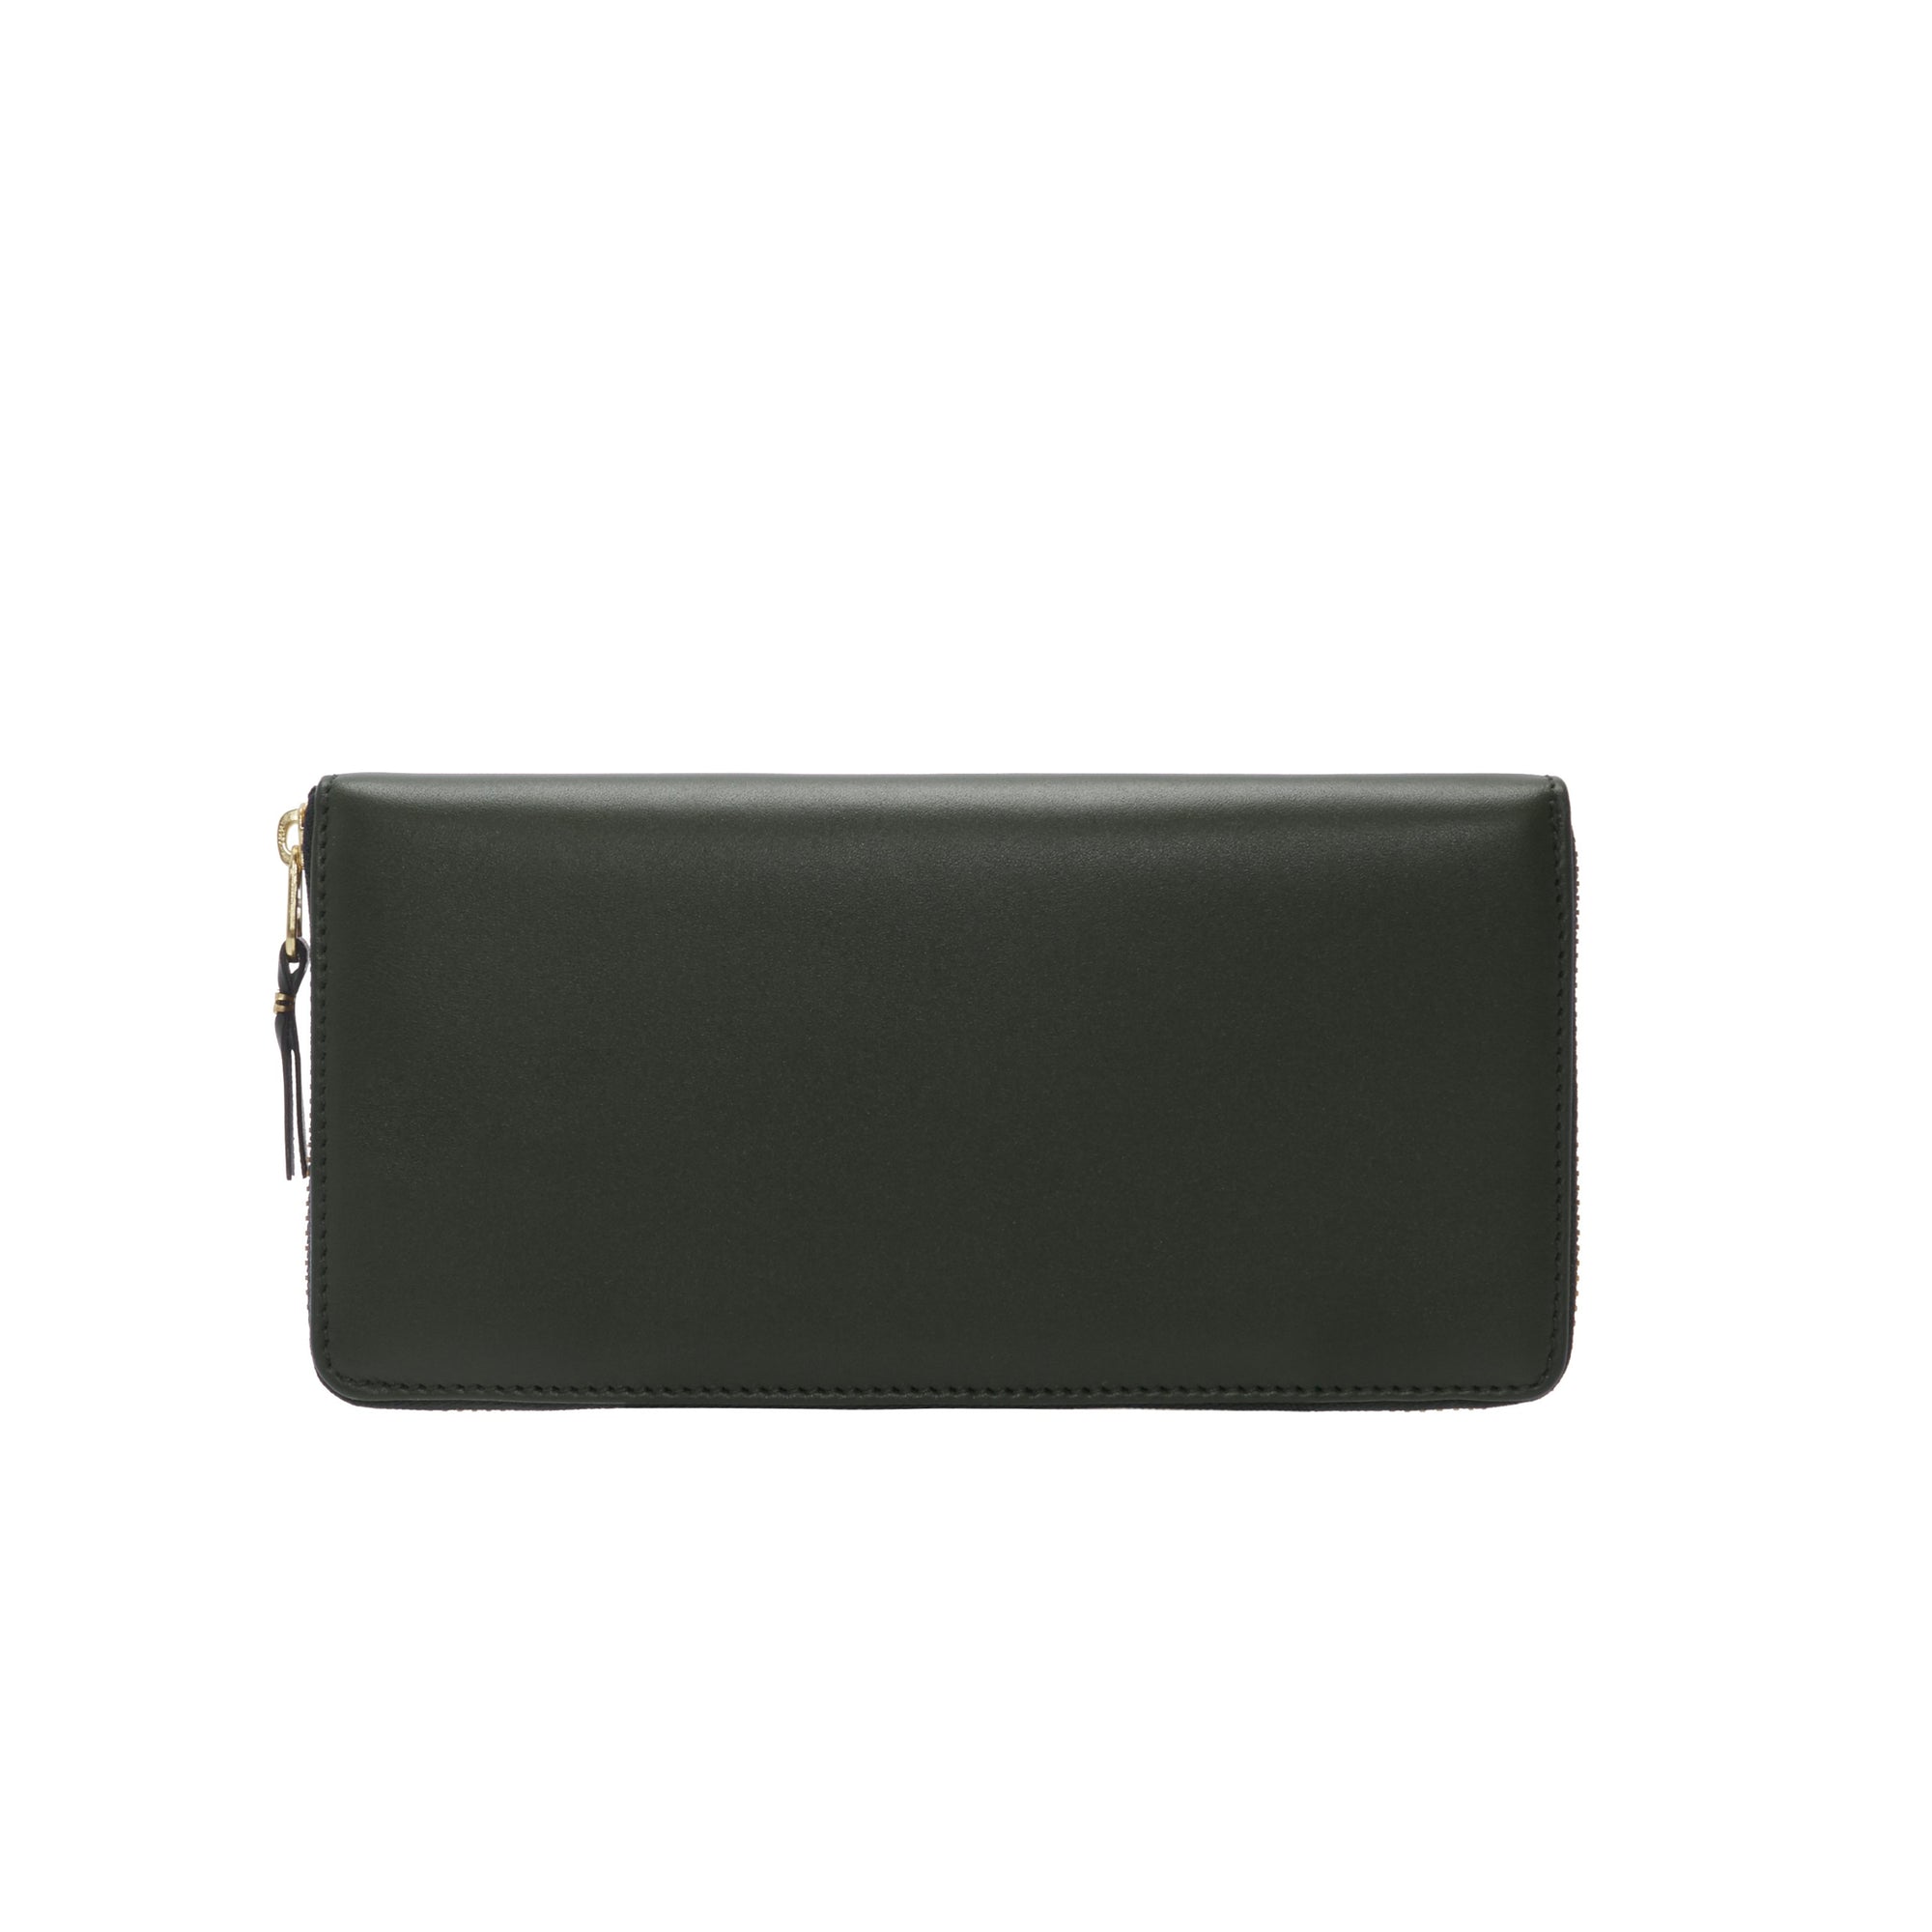 CDG WALLET - Classic Leather Line - (SA0110 DKGRN) view 1